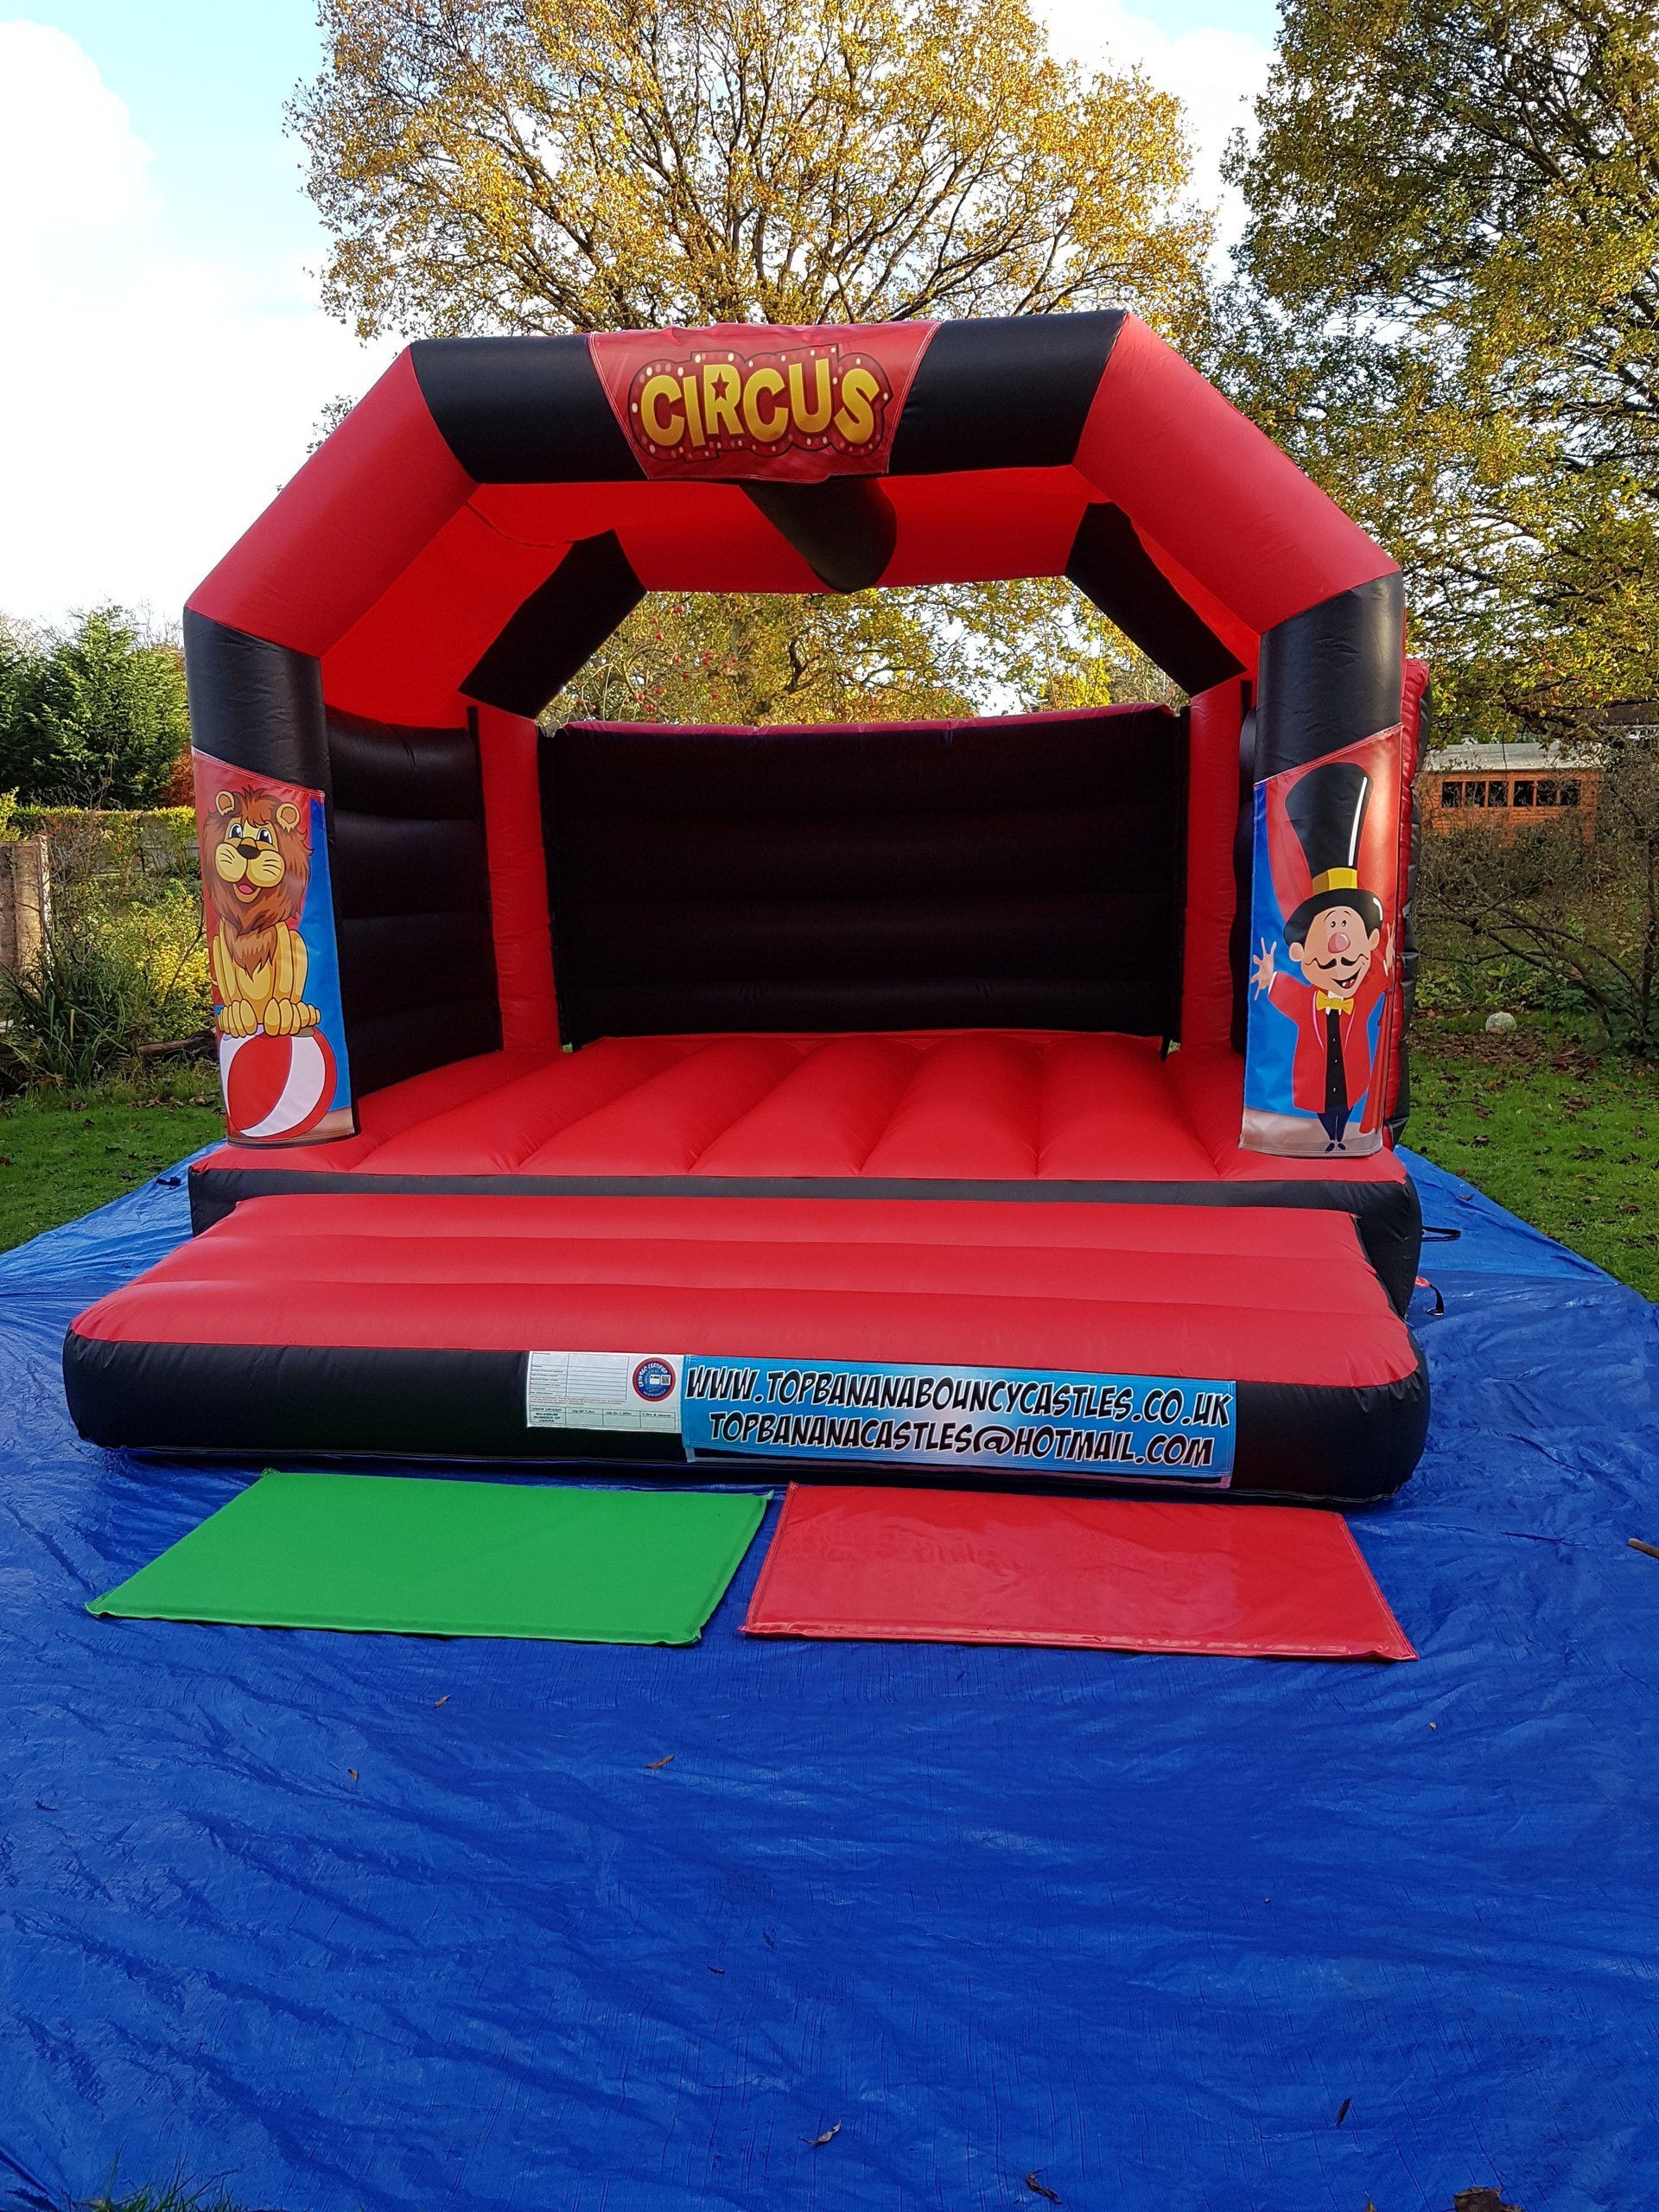 red and black adult bouncy castle with circus artwork